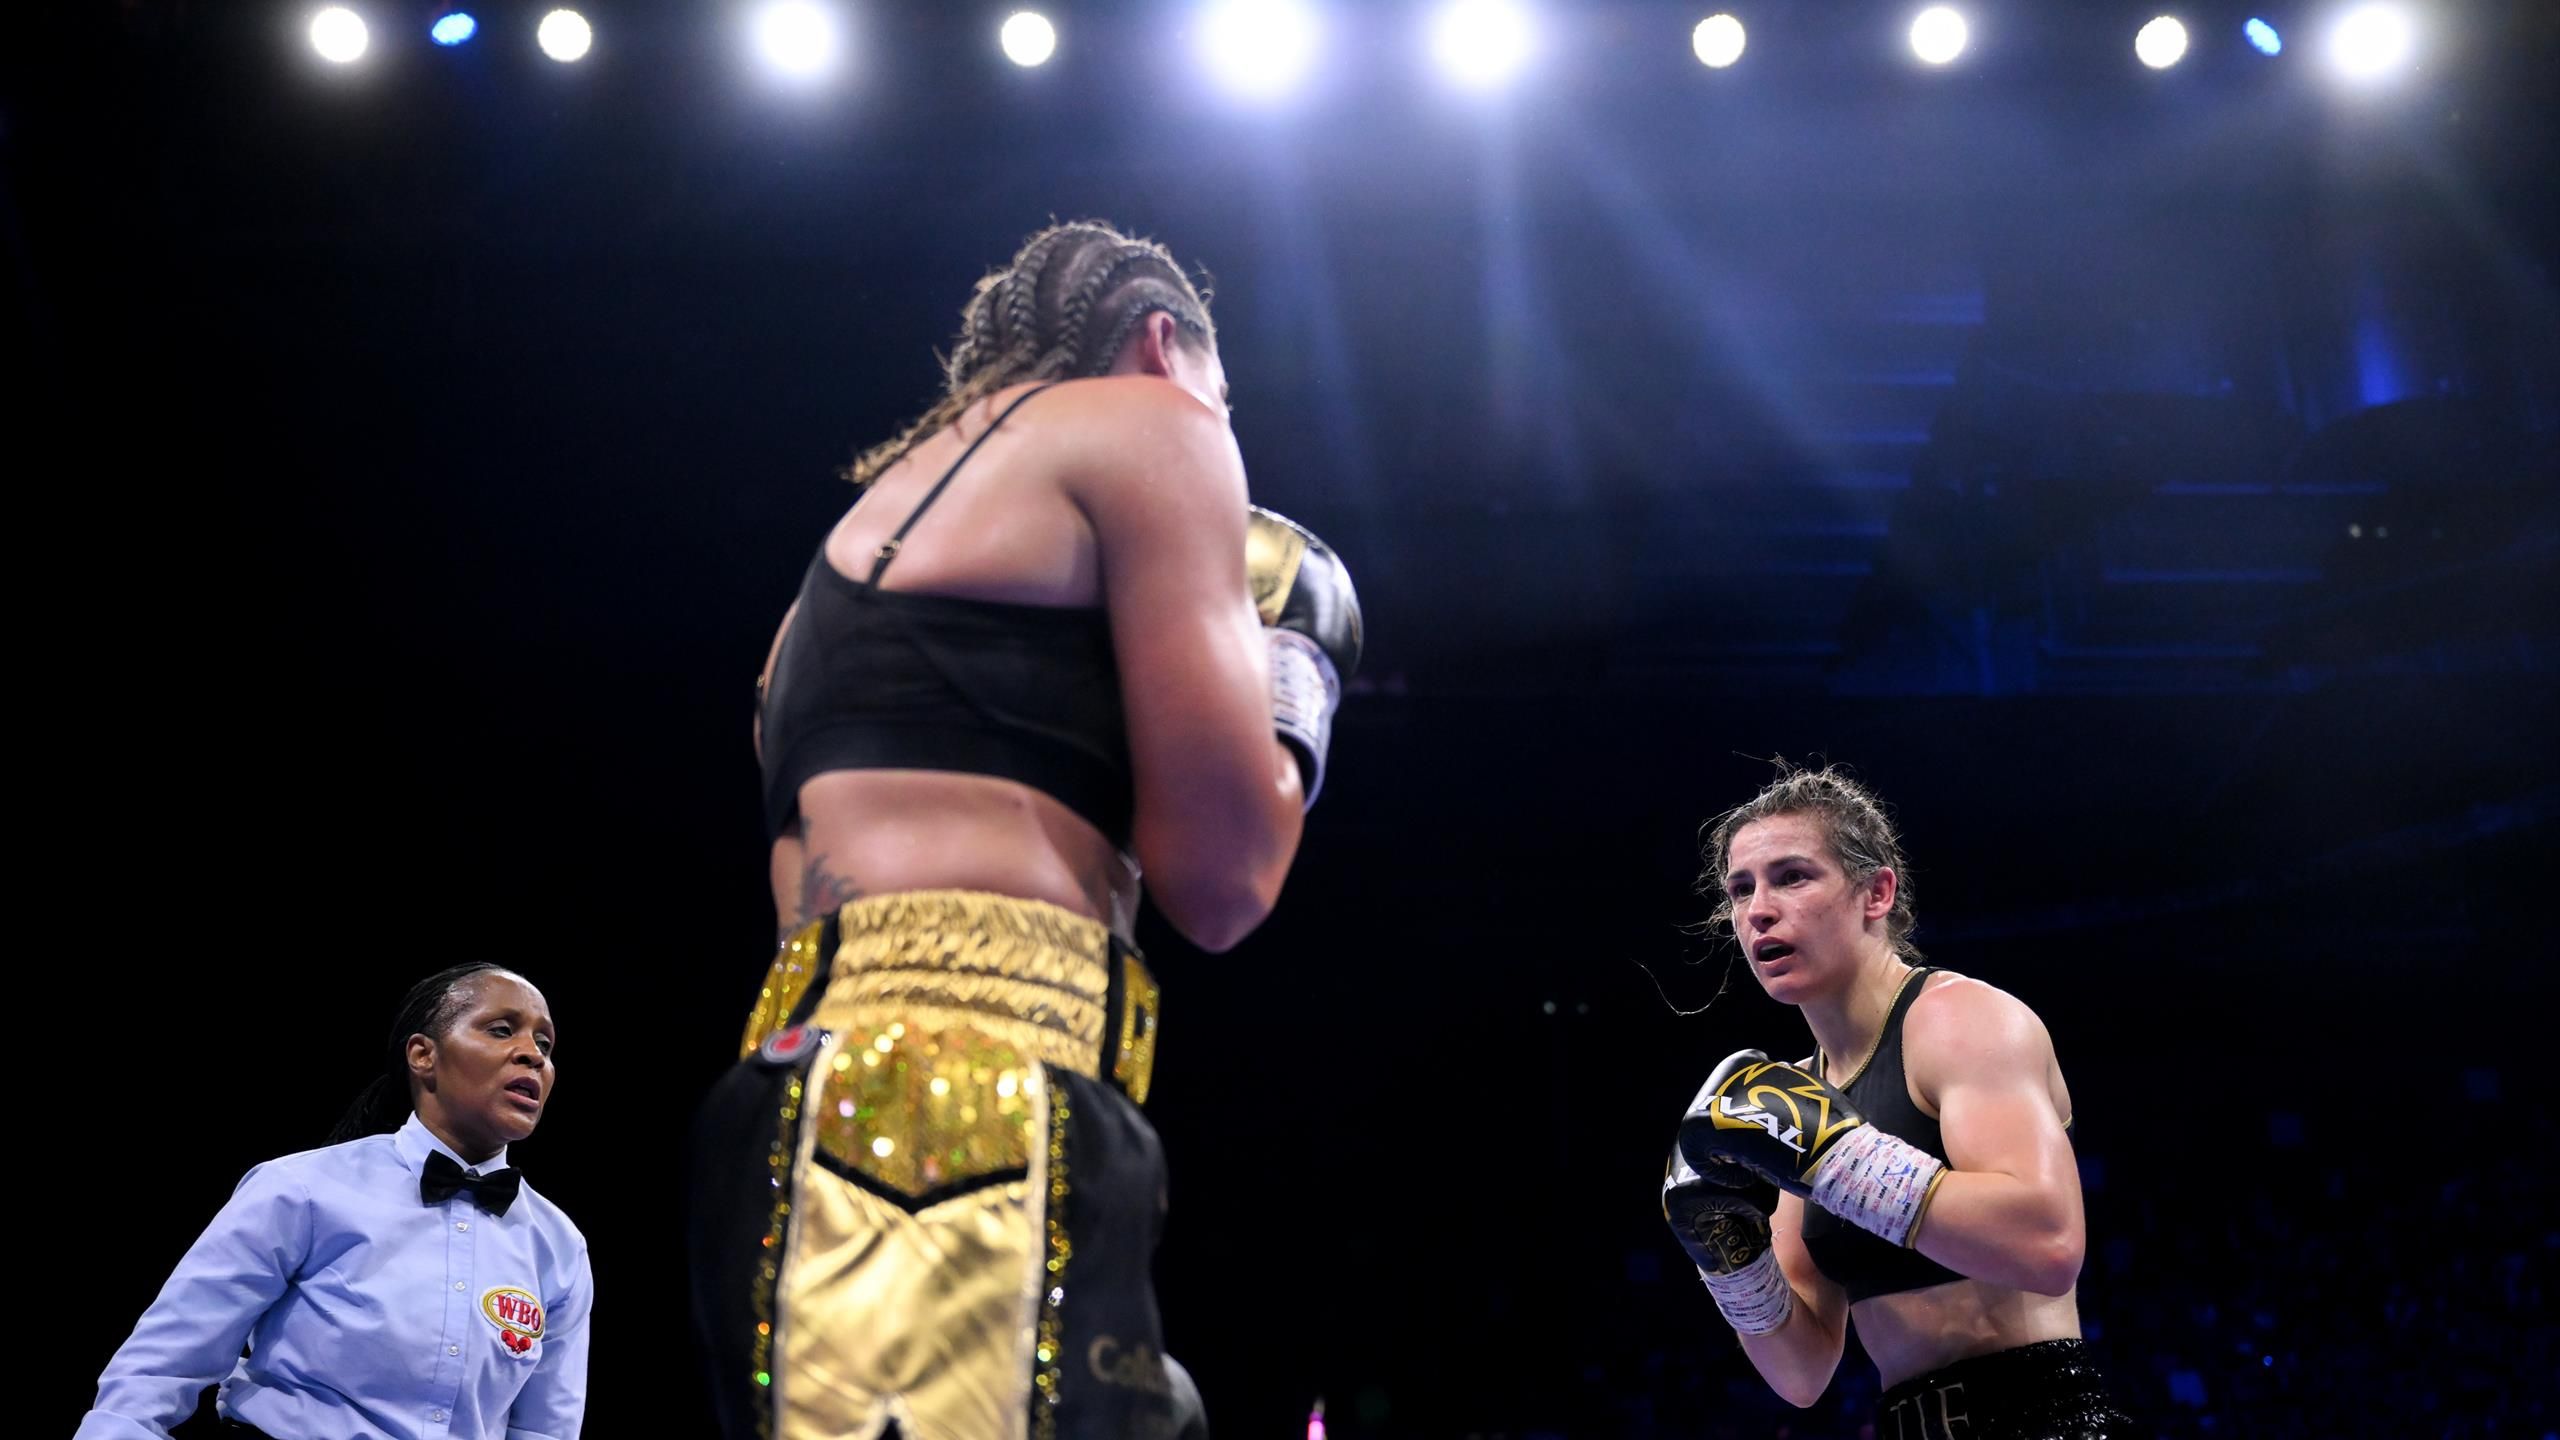 Katie Taylor to get rematch with undisputed champion Chantelle Cameron in Dublin - These are the occasions I live for